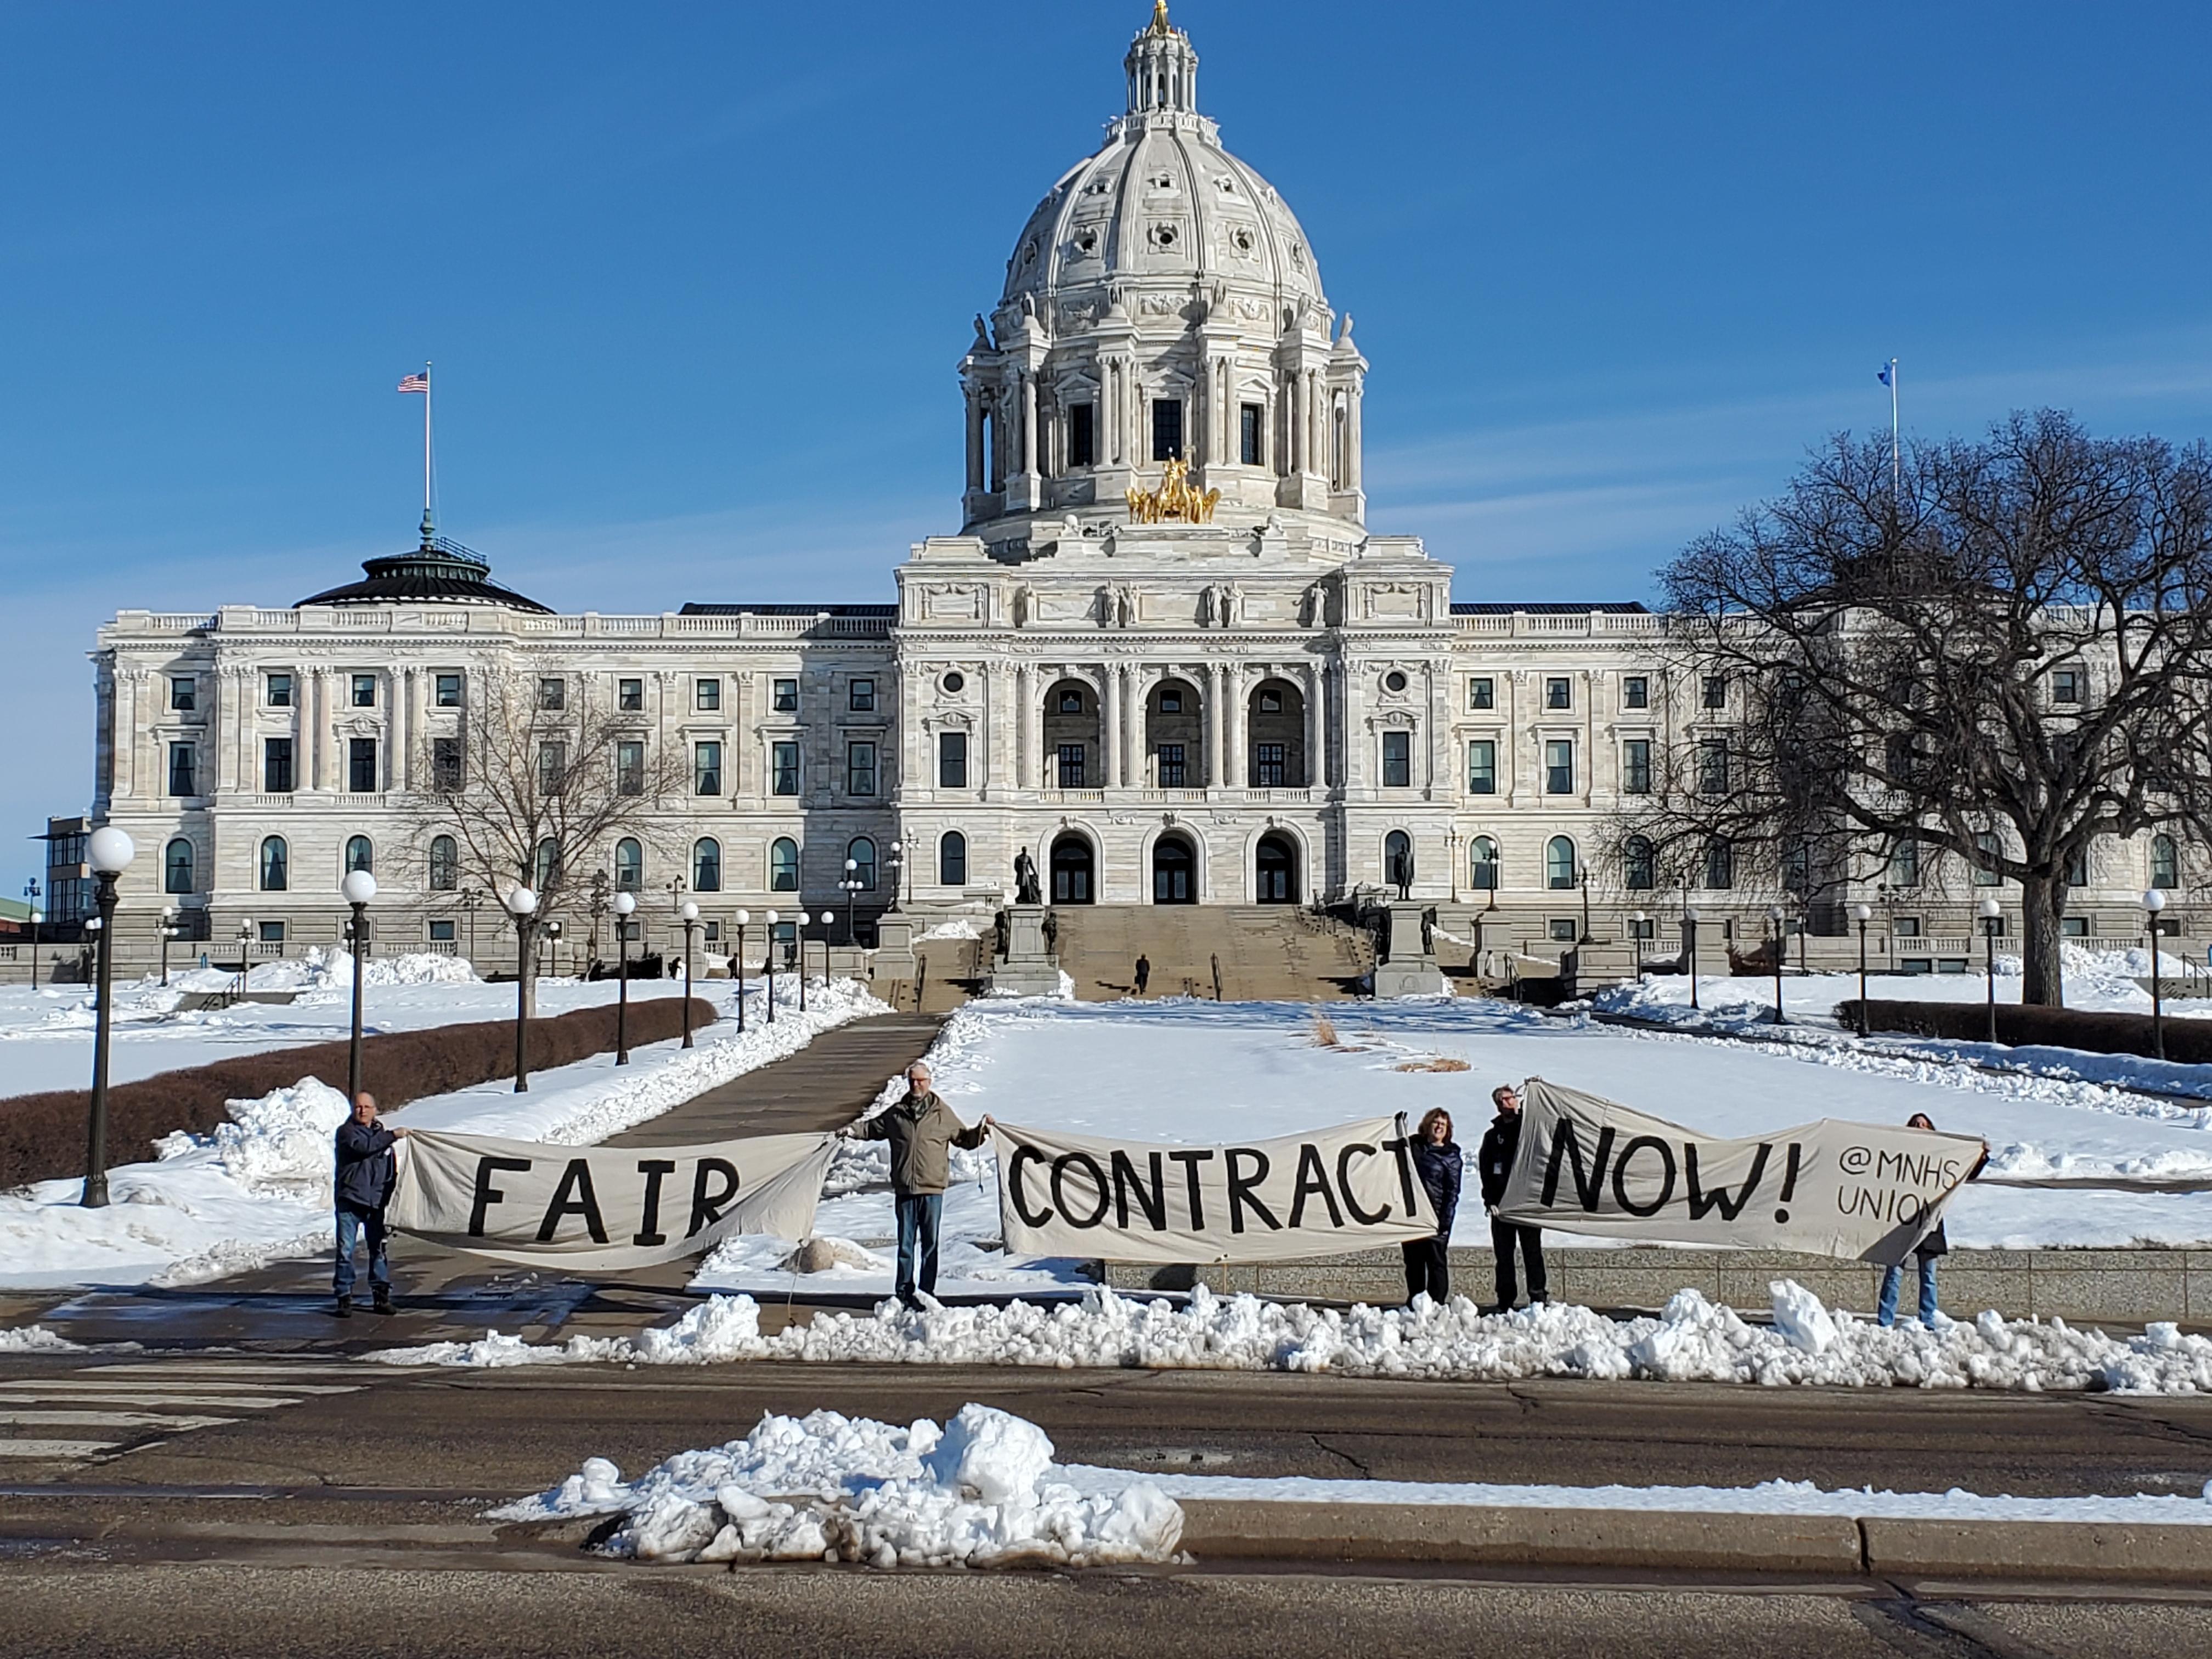 Fair contract now banner in front of the Minnesota State Capitol